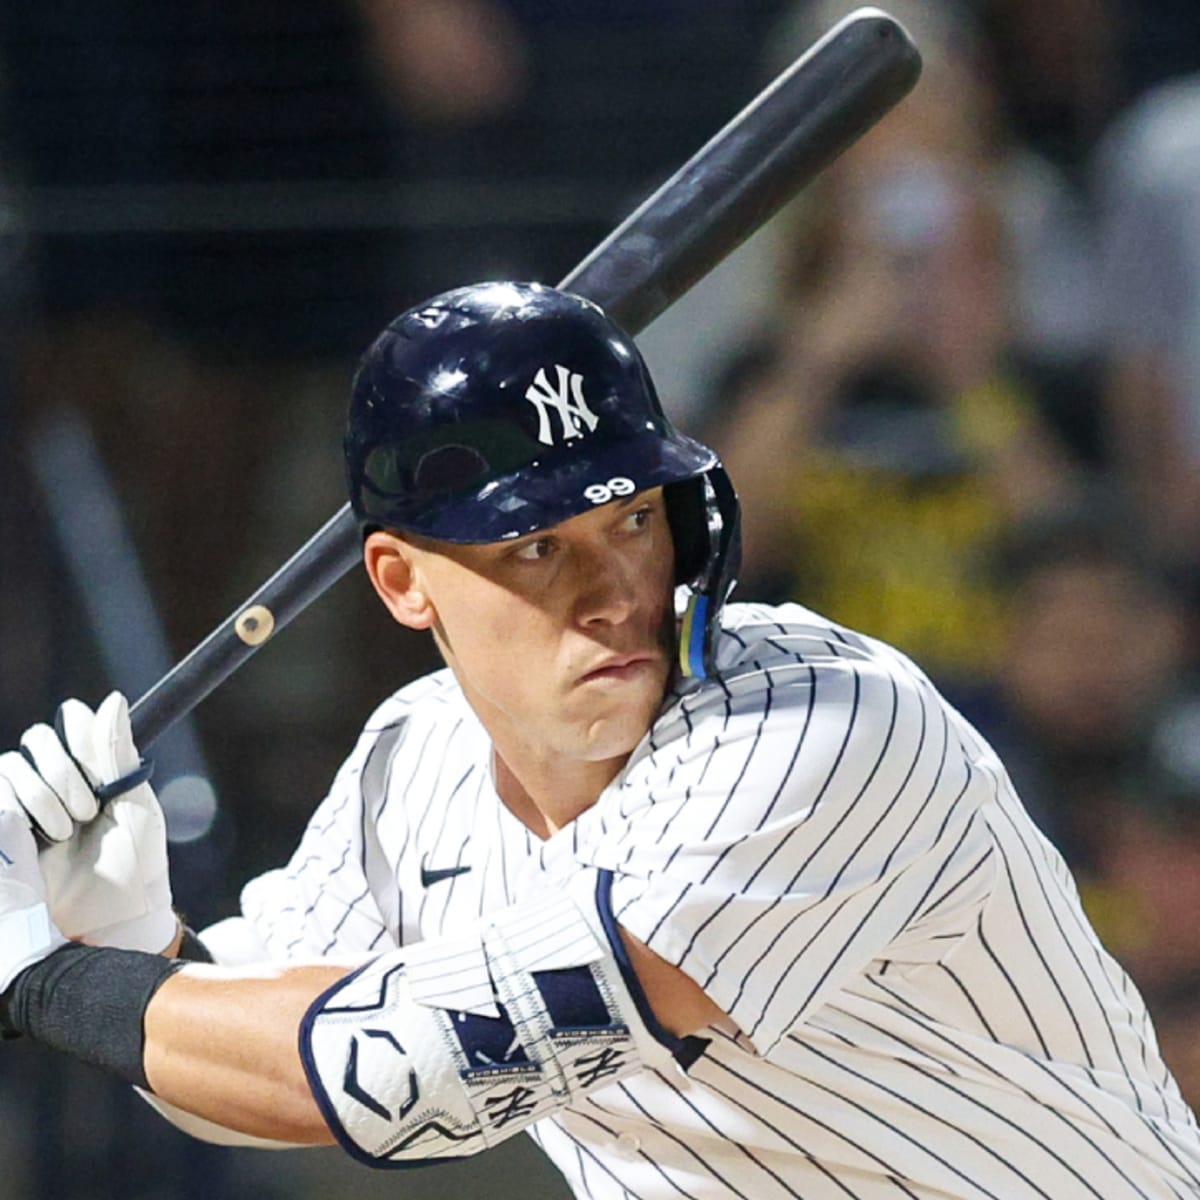 Fans upset as Yankees add corporate sponsor patch to jerseys